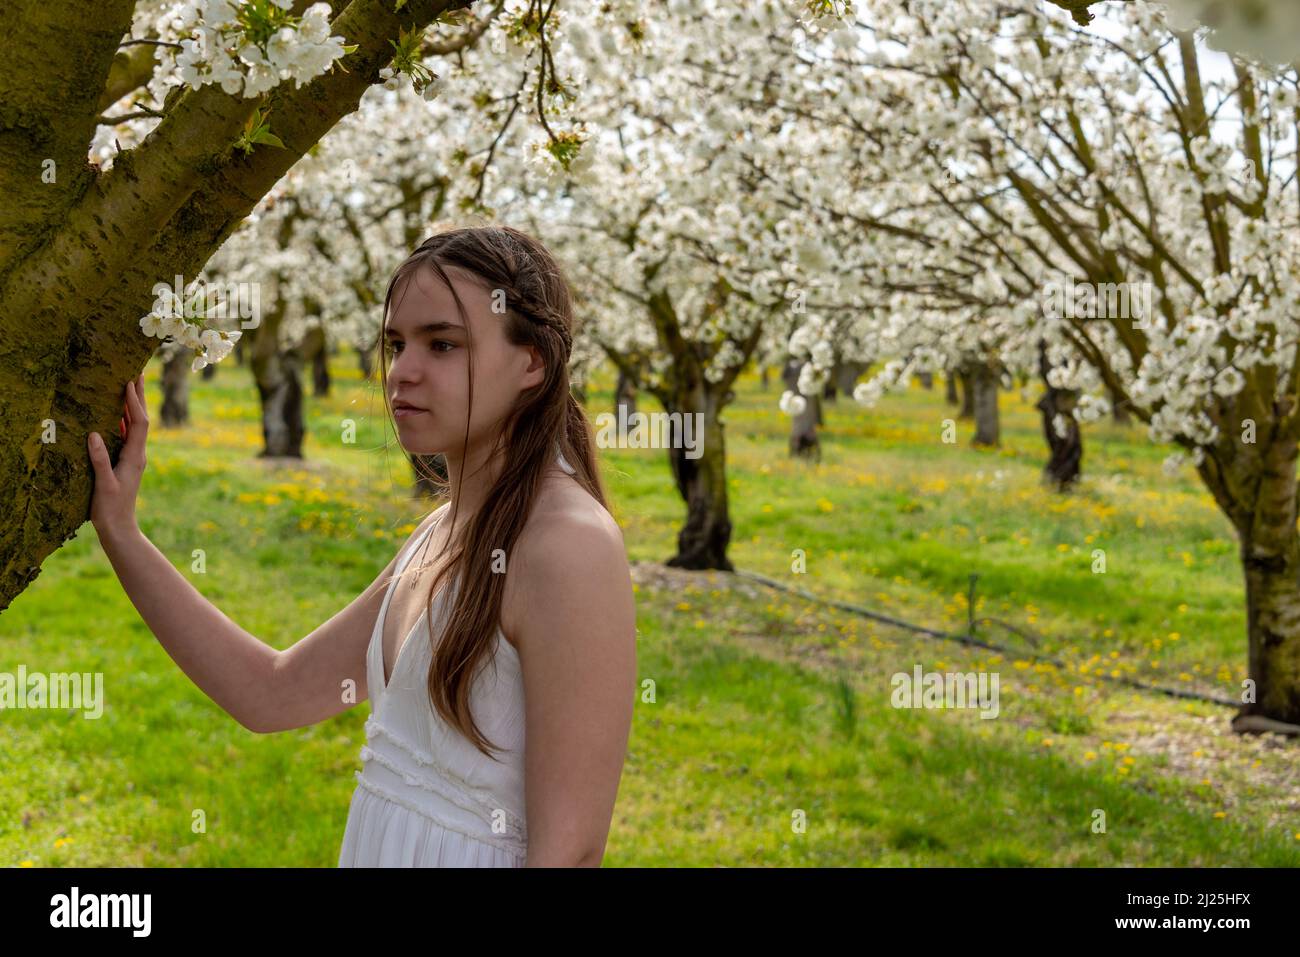 portrait of a young woman wearing a white dress  in  a cherry orchard with trees in blossom. spring summer image . Stock Photo